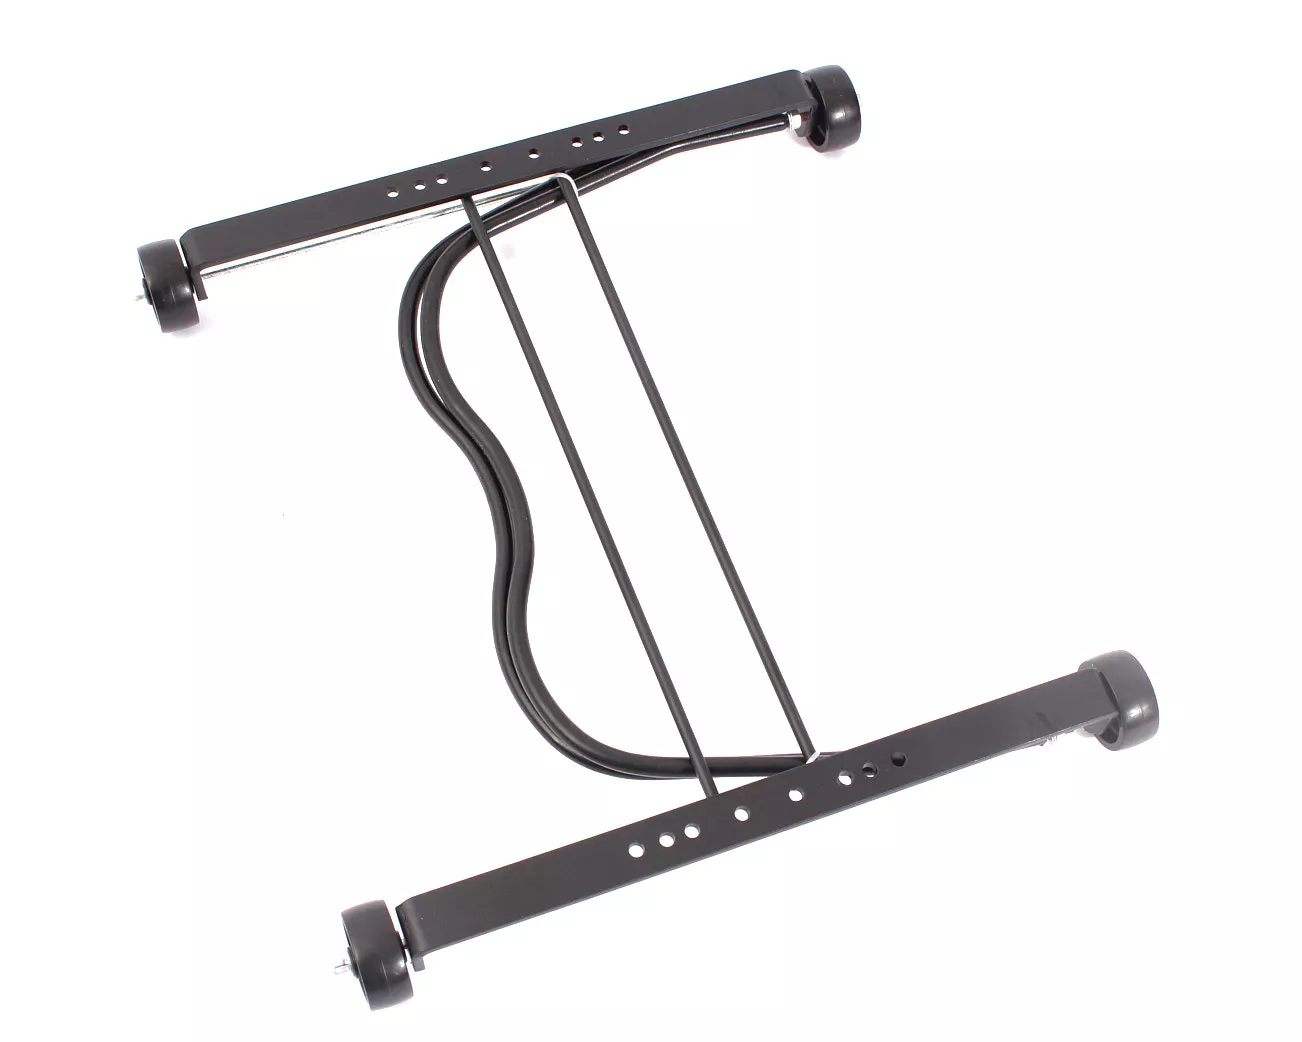 BMX bicycle stand KHE 12 to 29 inch